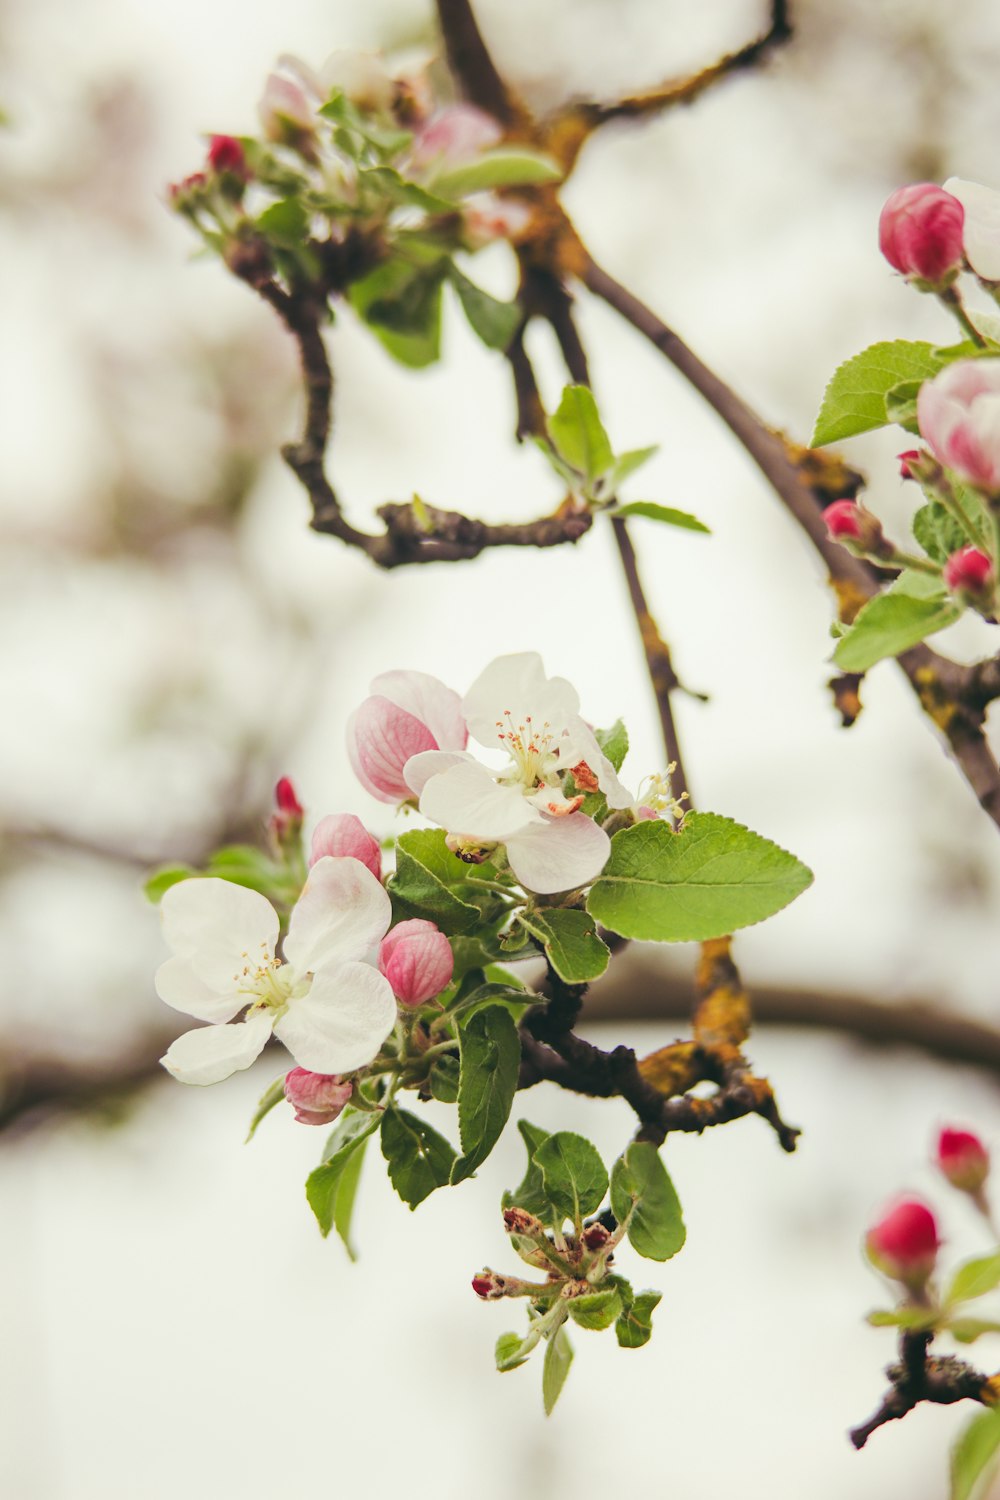 a branch of a flowering apple tree with pink and white flowers